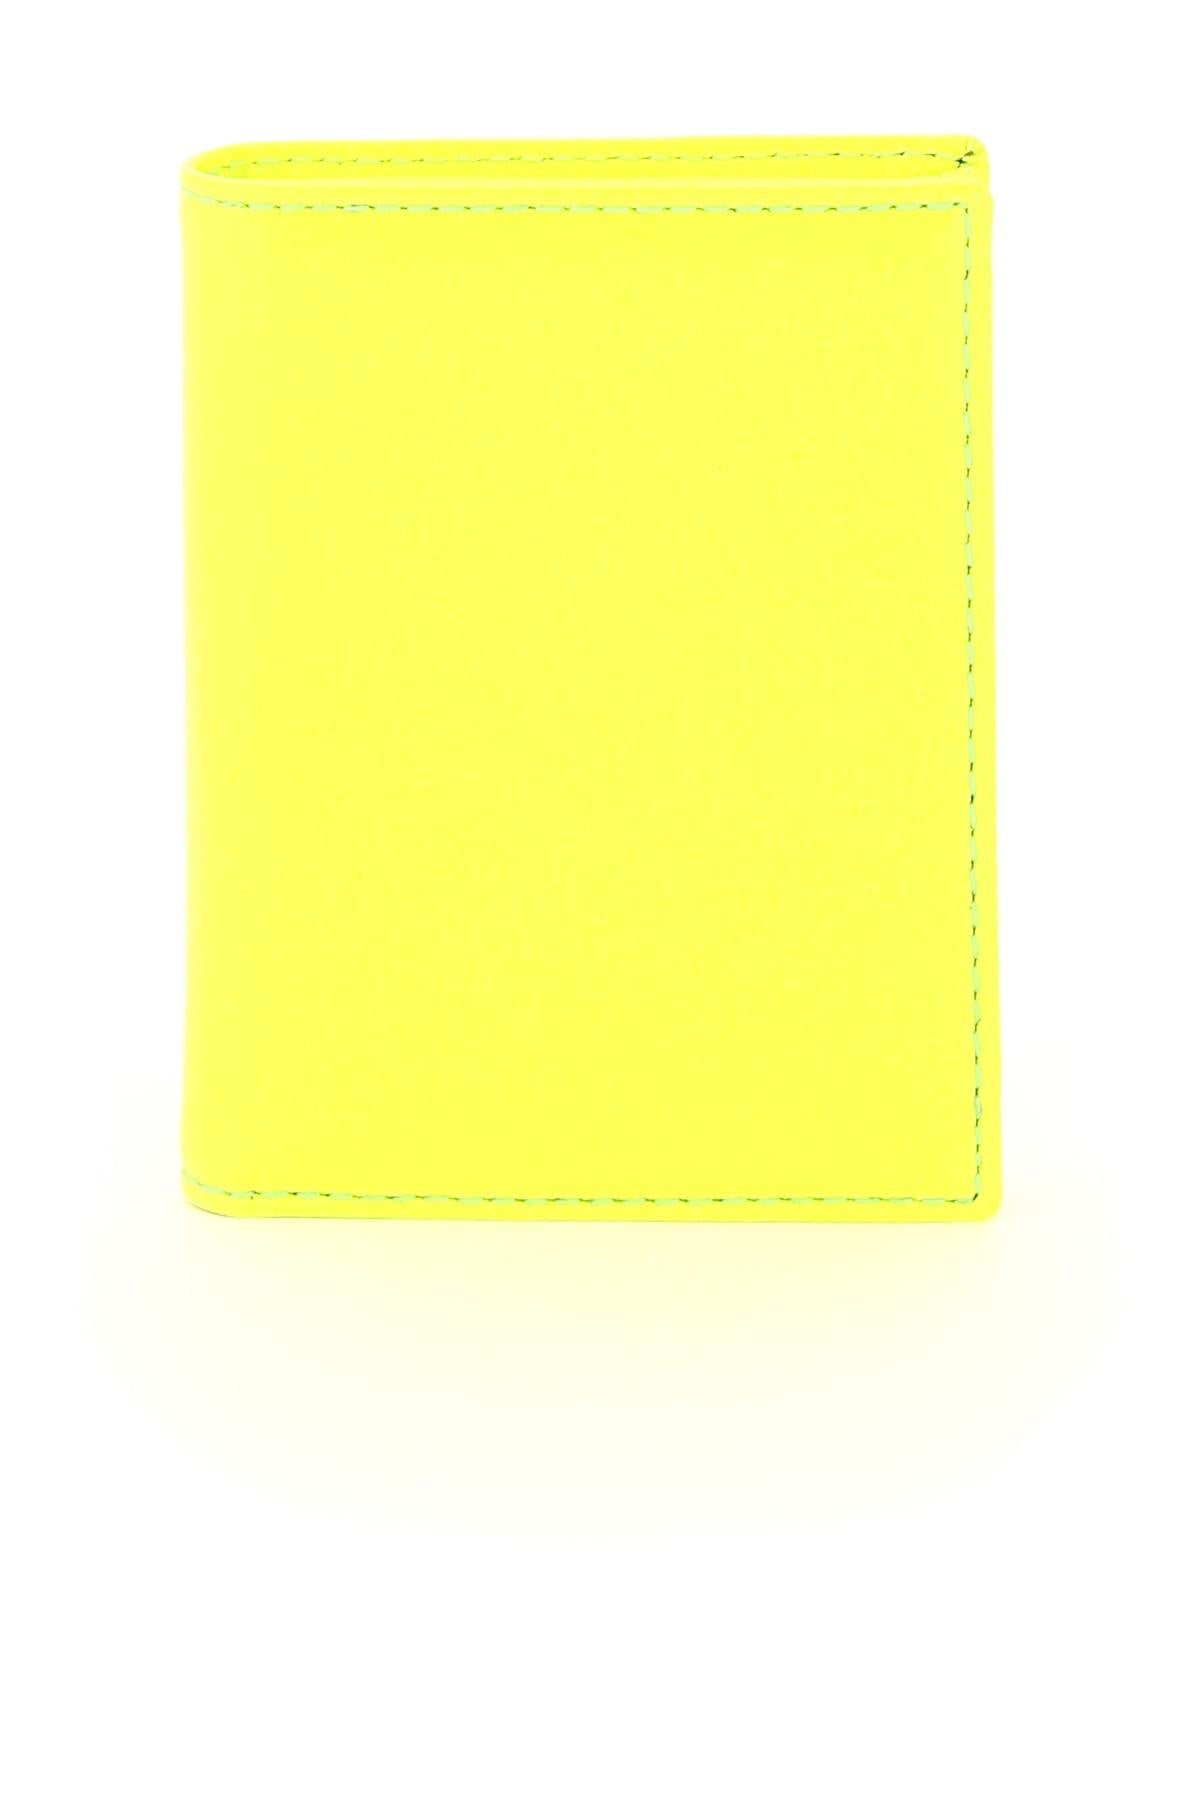 Comme des garcons wallet fluo leather bifold wallet SA0641SF YELLOW LIGHT ORANGE